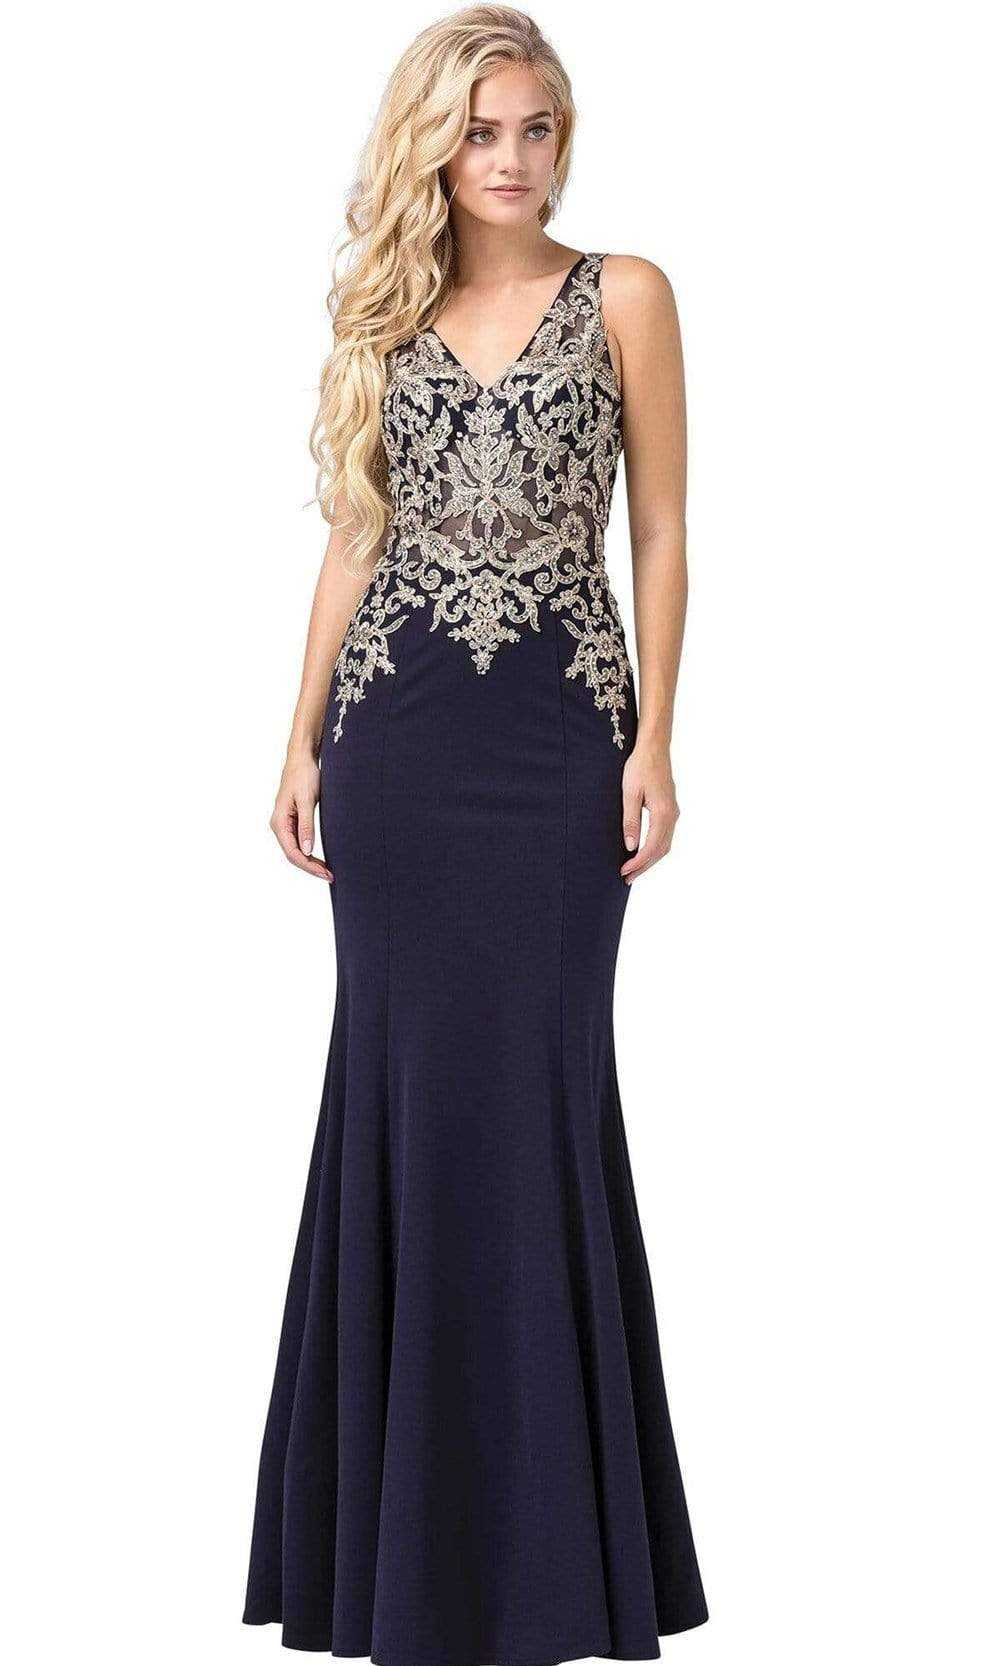 Dancing Queen, Dancing Queen - Embellished V-Neck Fitted Long Gown 2496 - 1 pc Navy In Size S Available